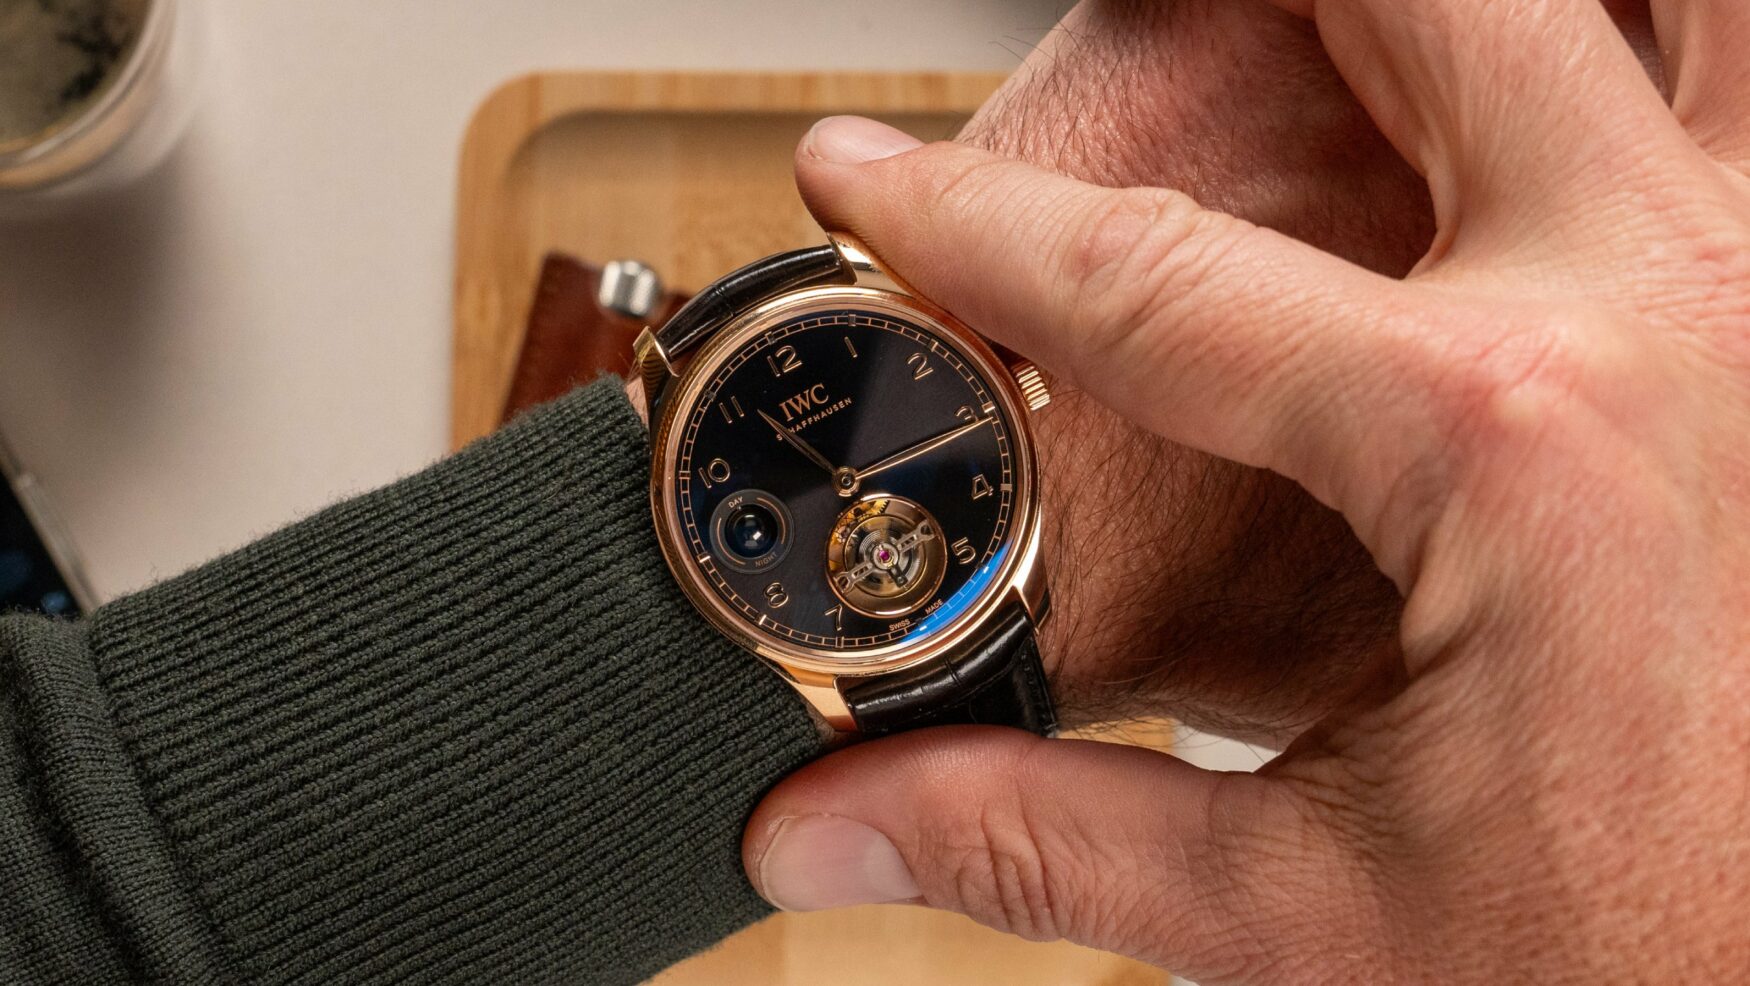 The IWC Portugieser Hand-Wound Tourbillon Day & Night shows the globe in a novel way